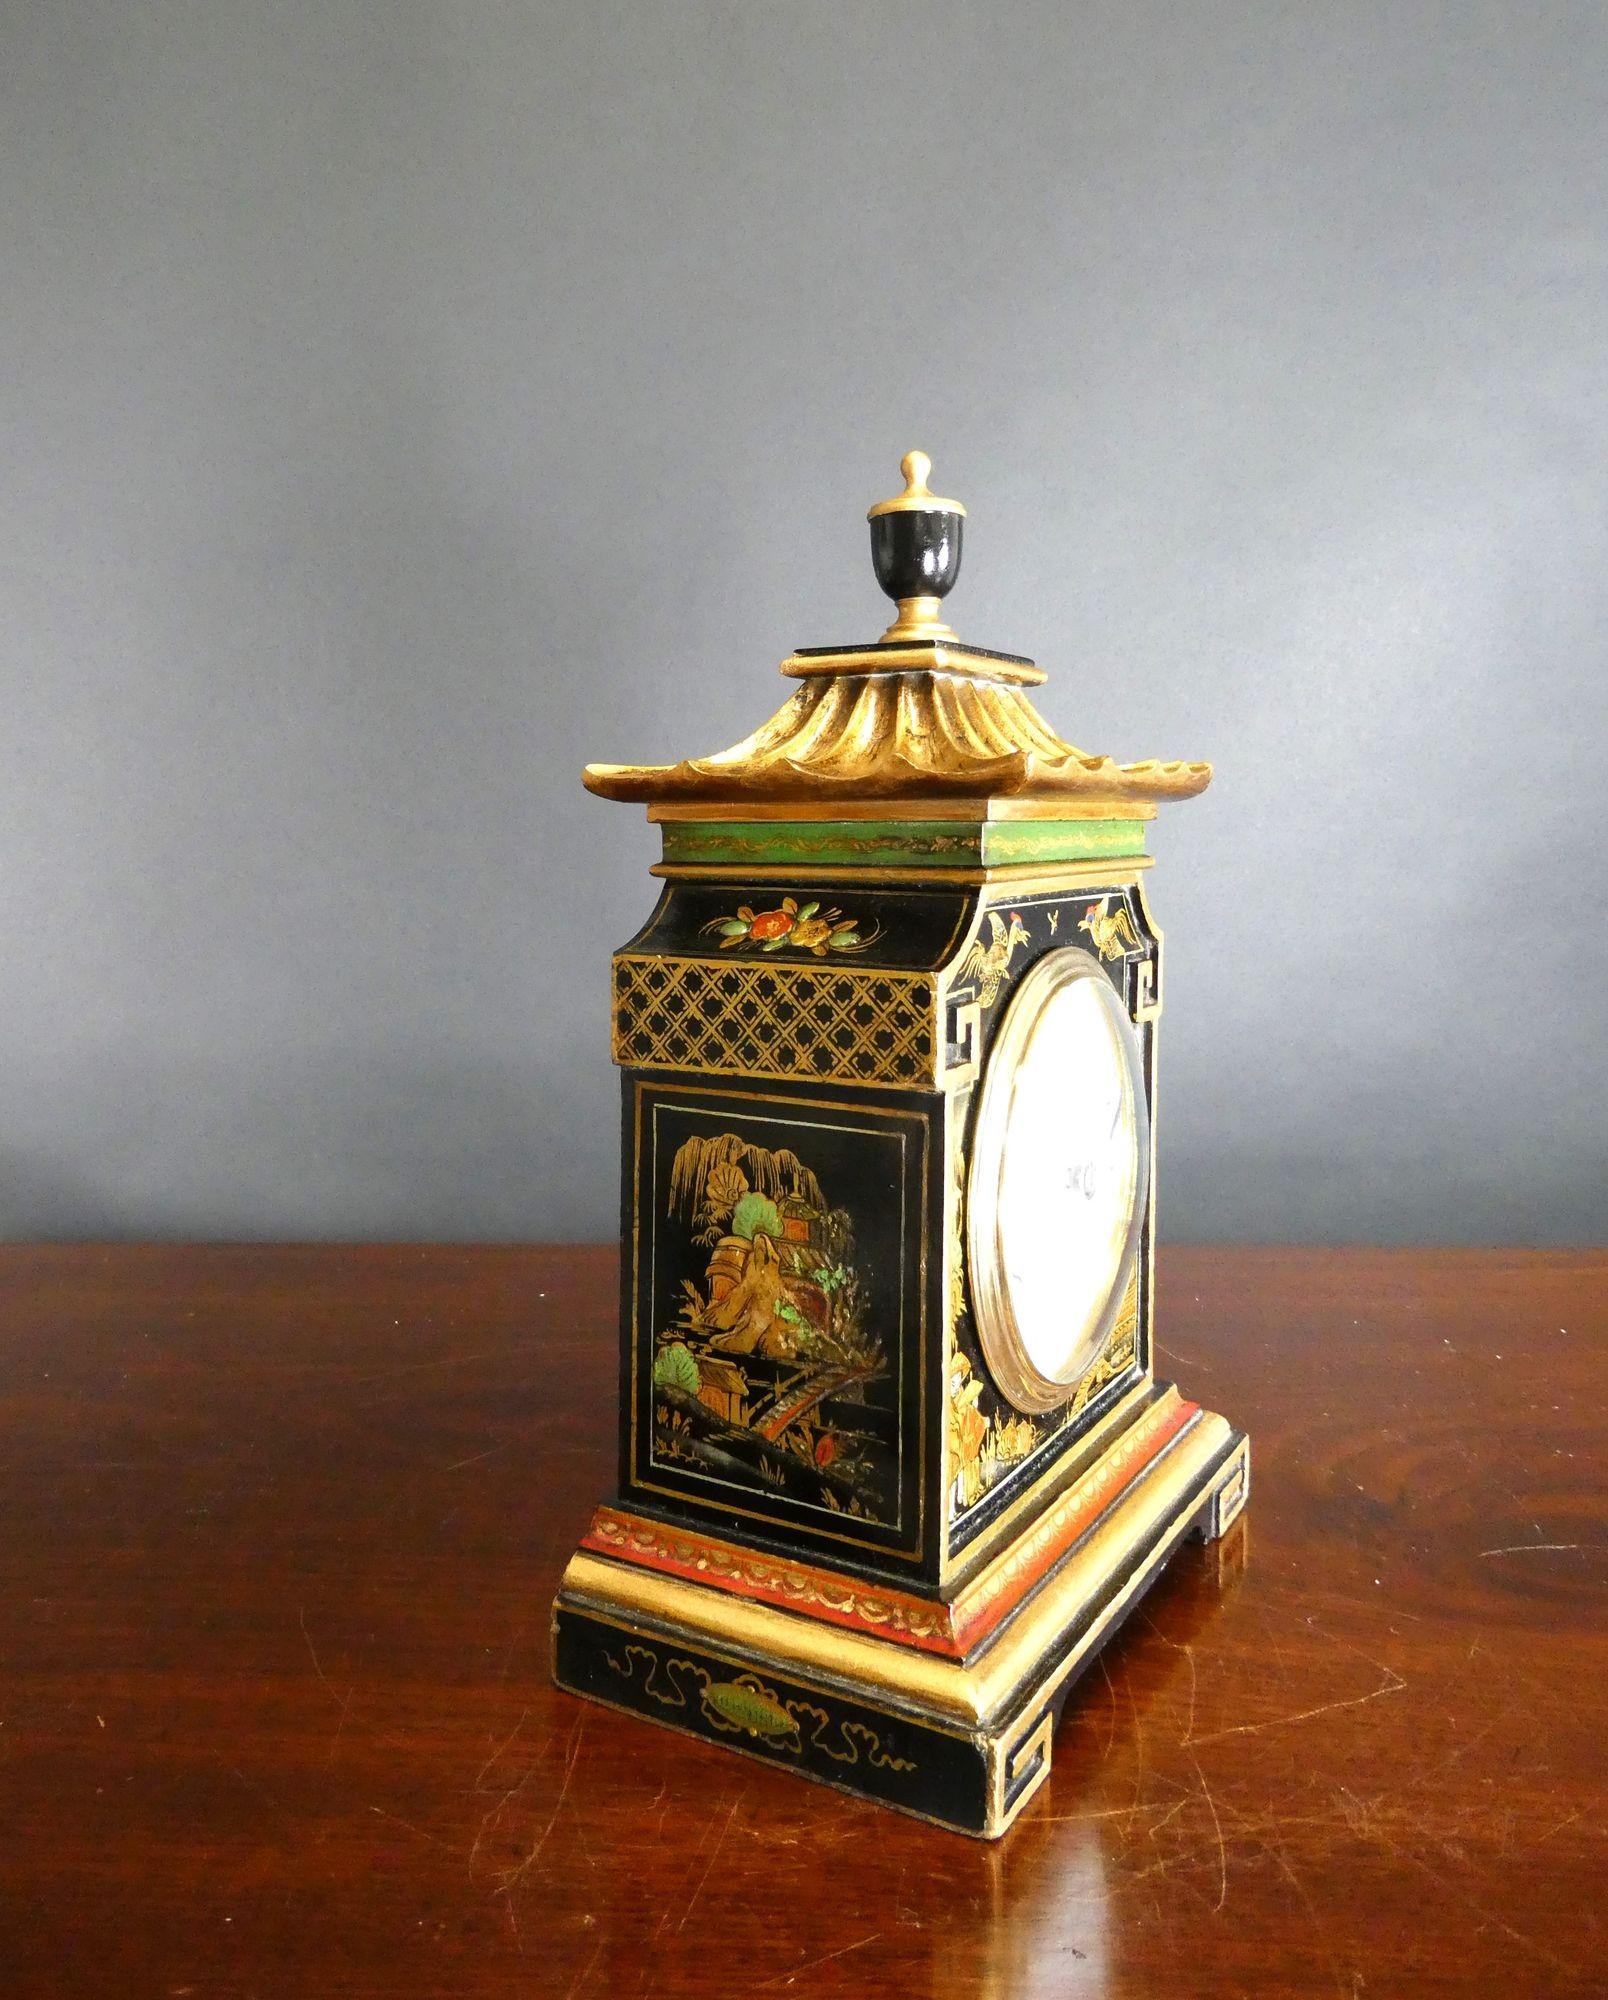 Edwardian Pagoda Top Chinoiserie Decorated Mantel Clock

Edwardian mantel clock housed in a pagoda top case with raised chinoiserie scenes on a black ground, coloured decorated band to the top and plinth and standing on decorated block feet. The